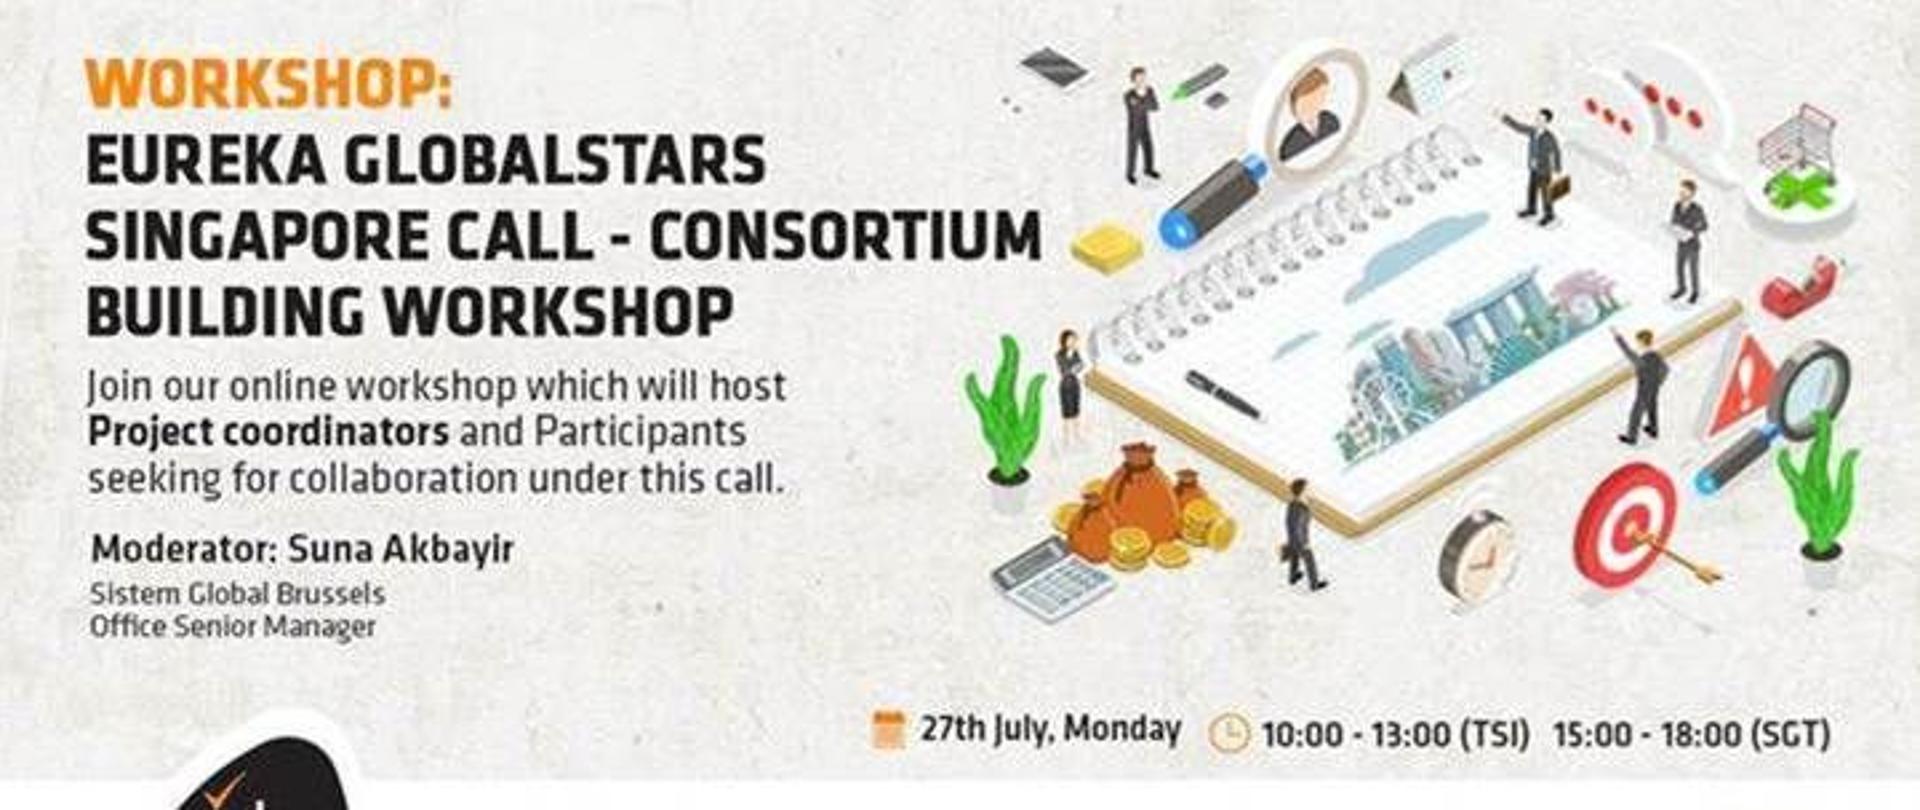 na szarym polu napis Join us for our online workshop on 27th July!
In collaboration with IPI Singapore and Enterprise Singapore, Sistem Global’s Brussels Office is organizing the EUREKA GLOBALSTARS SINGAPORE Call for Consortium Building Online Workshop on 27th of July, between 15:00-18:00 SGT ( 10.00-13.00. Turkish Time) (GMT +3)
We will host;